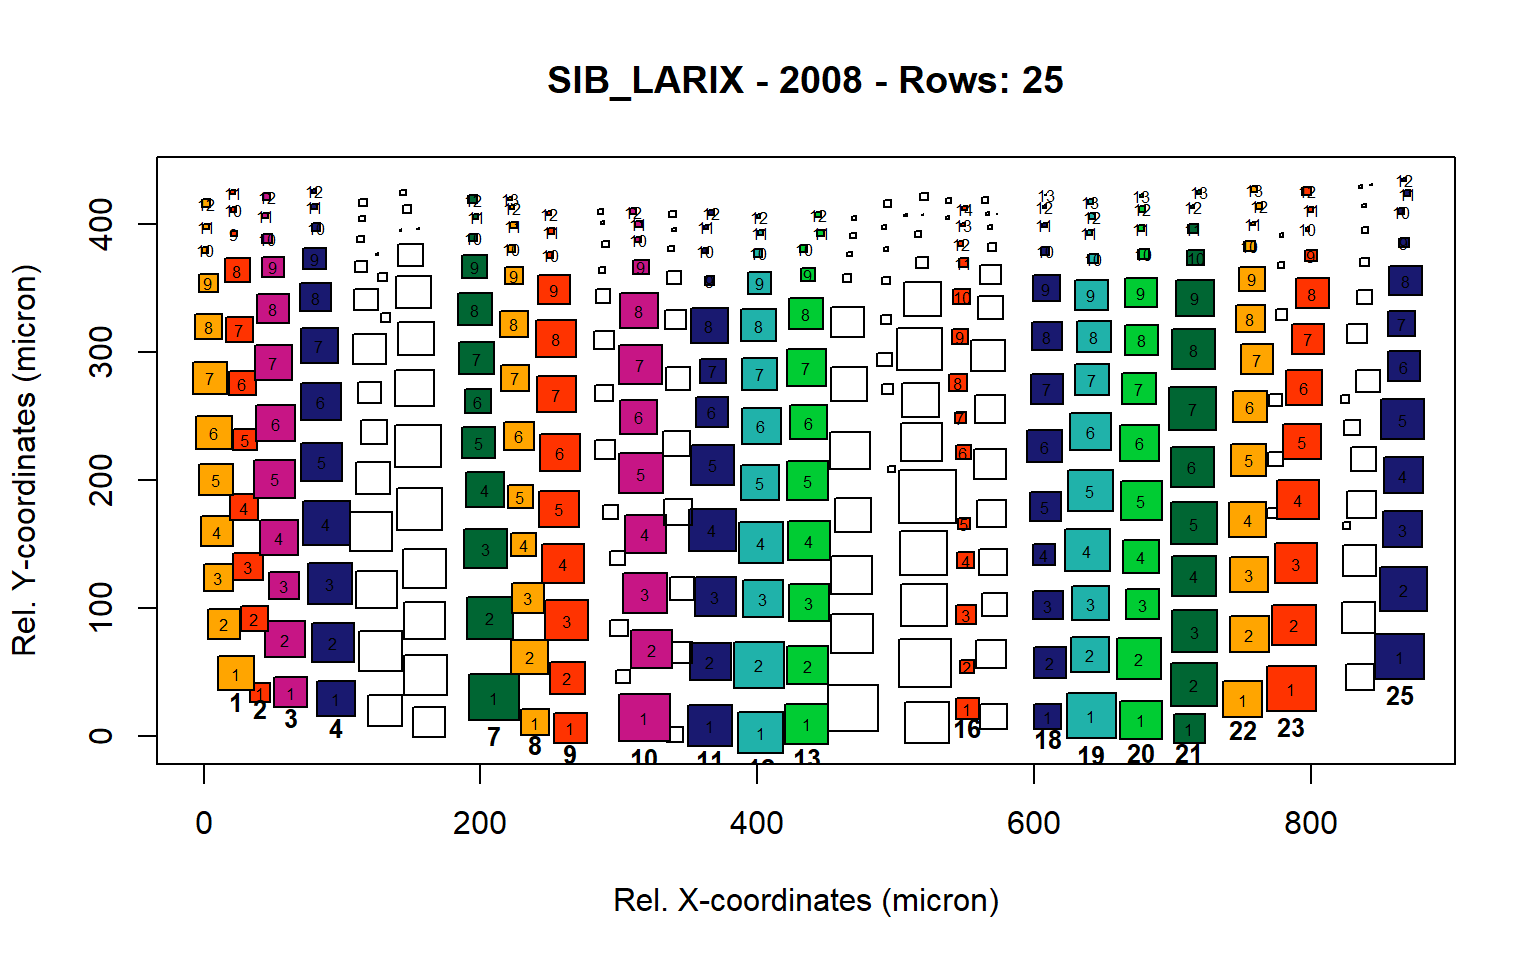 Standard plots generated by the write.output() function for Lotschental Picea abies (species="LOT_PICEA"), including 2007, 2008, 2009 and 2010.